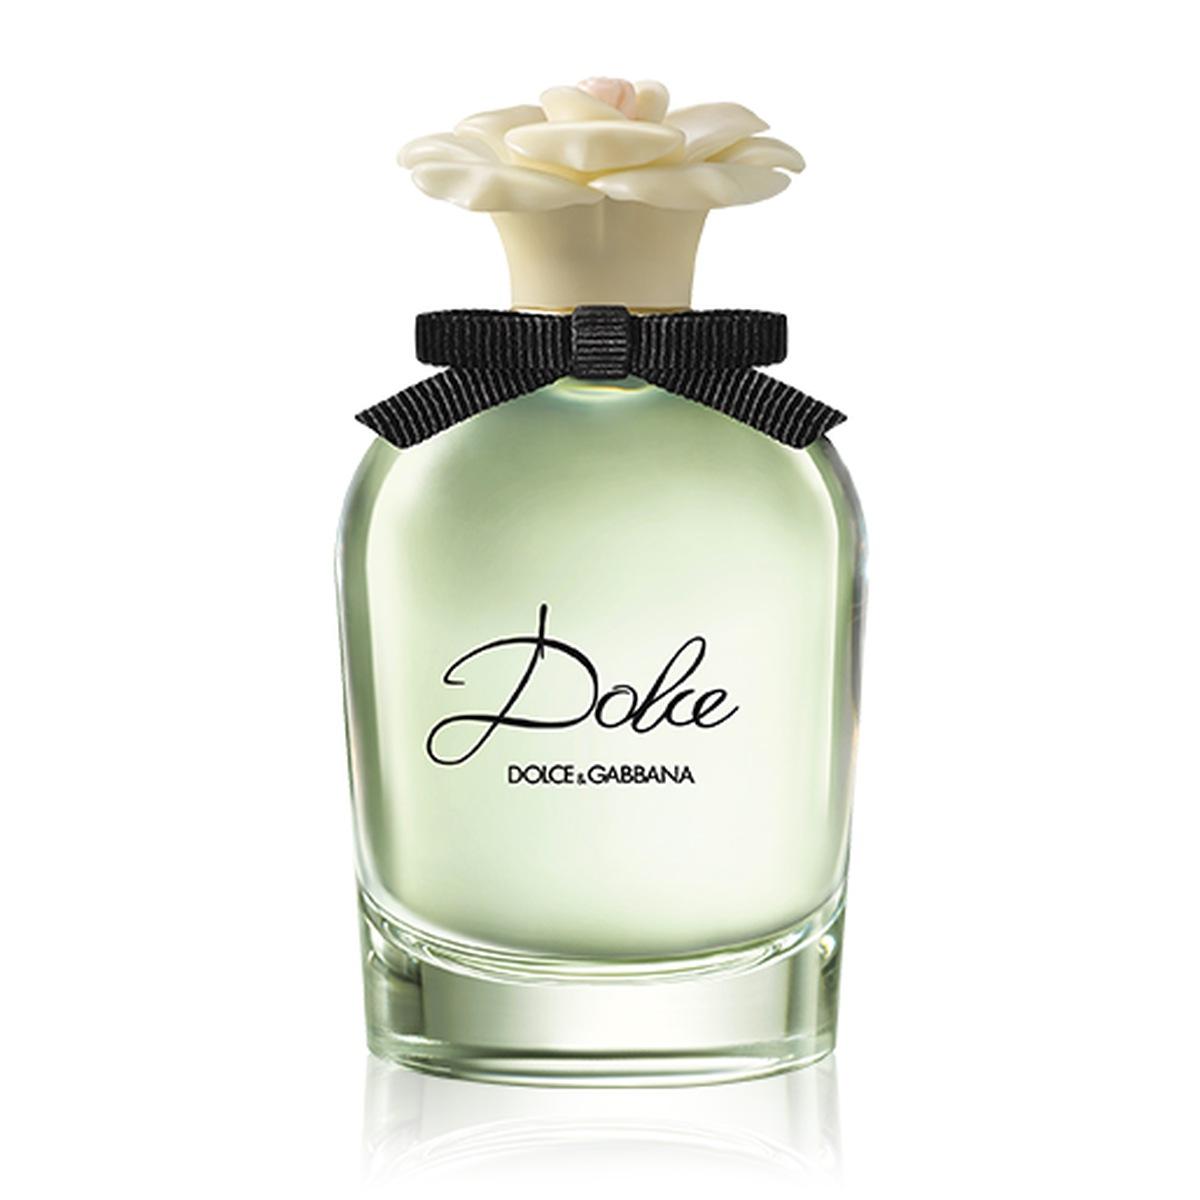 Dolce 30 ml